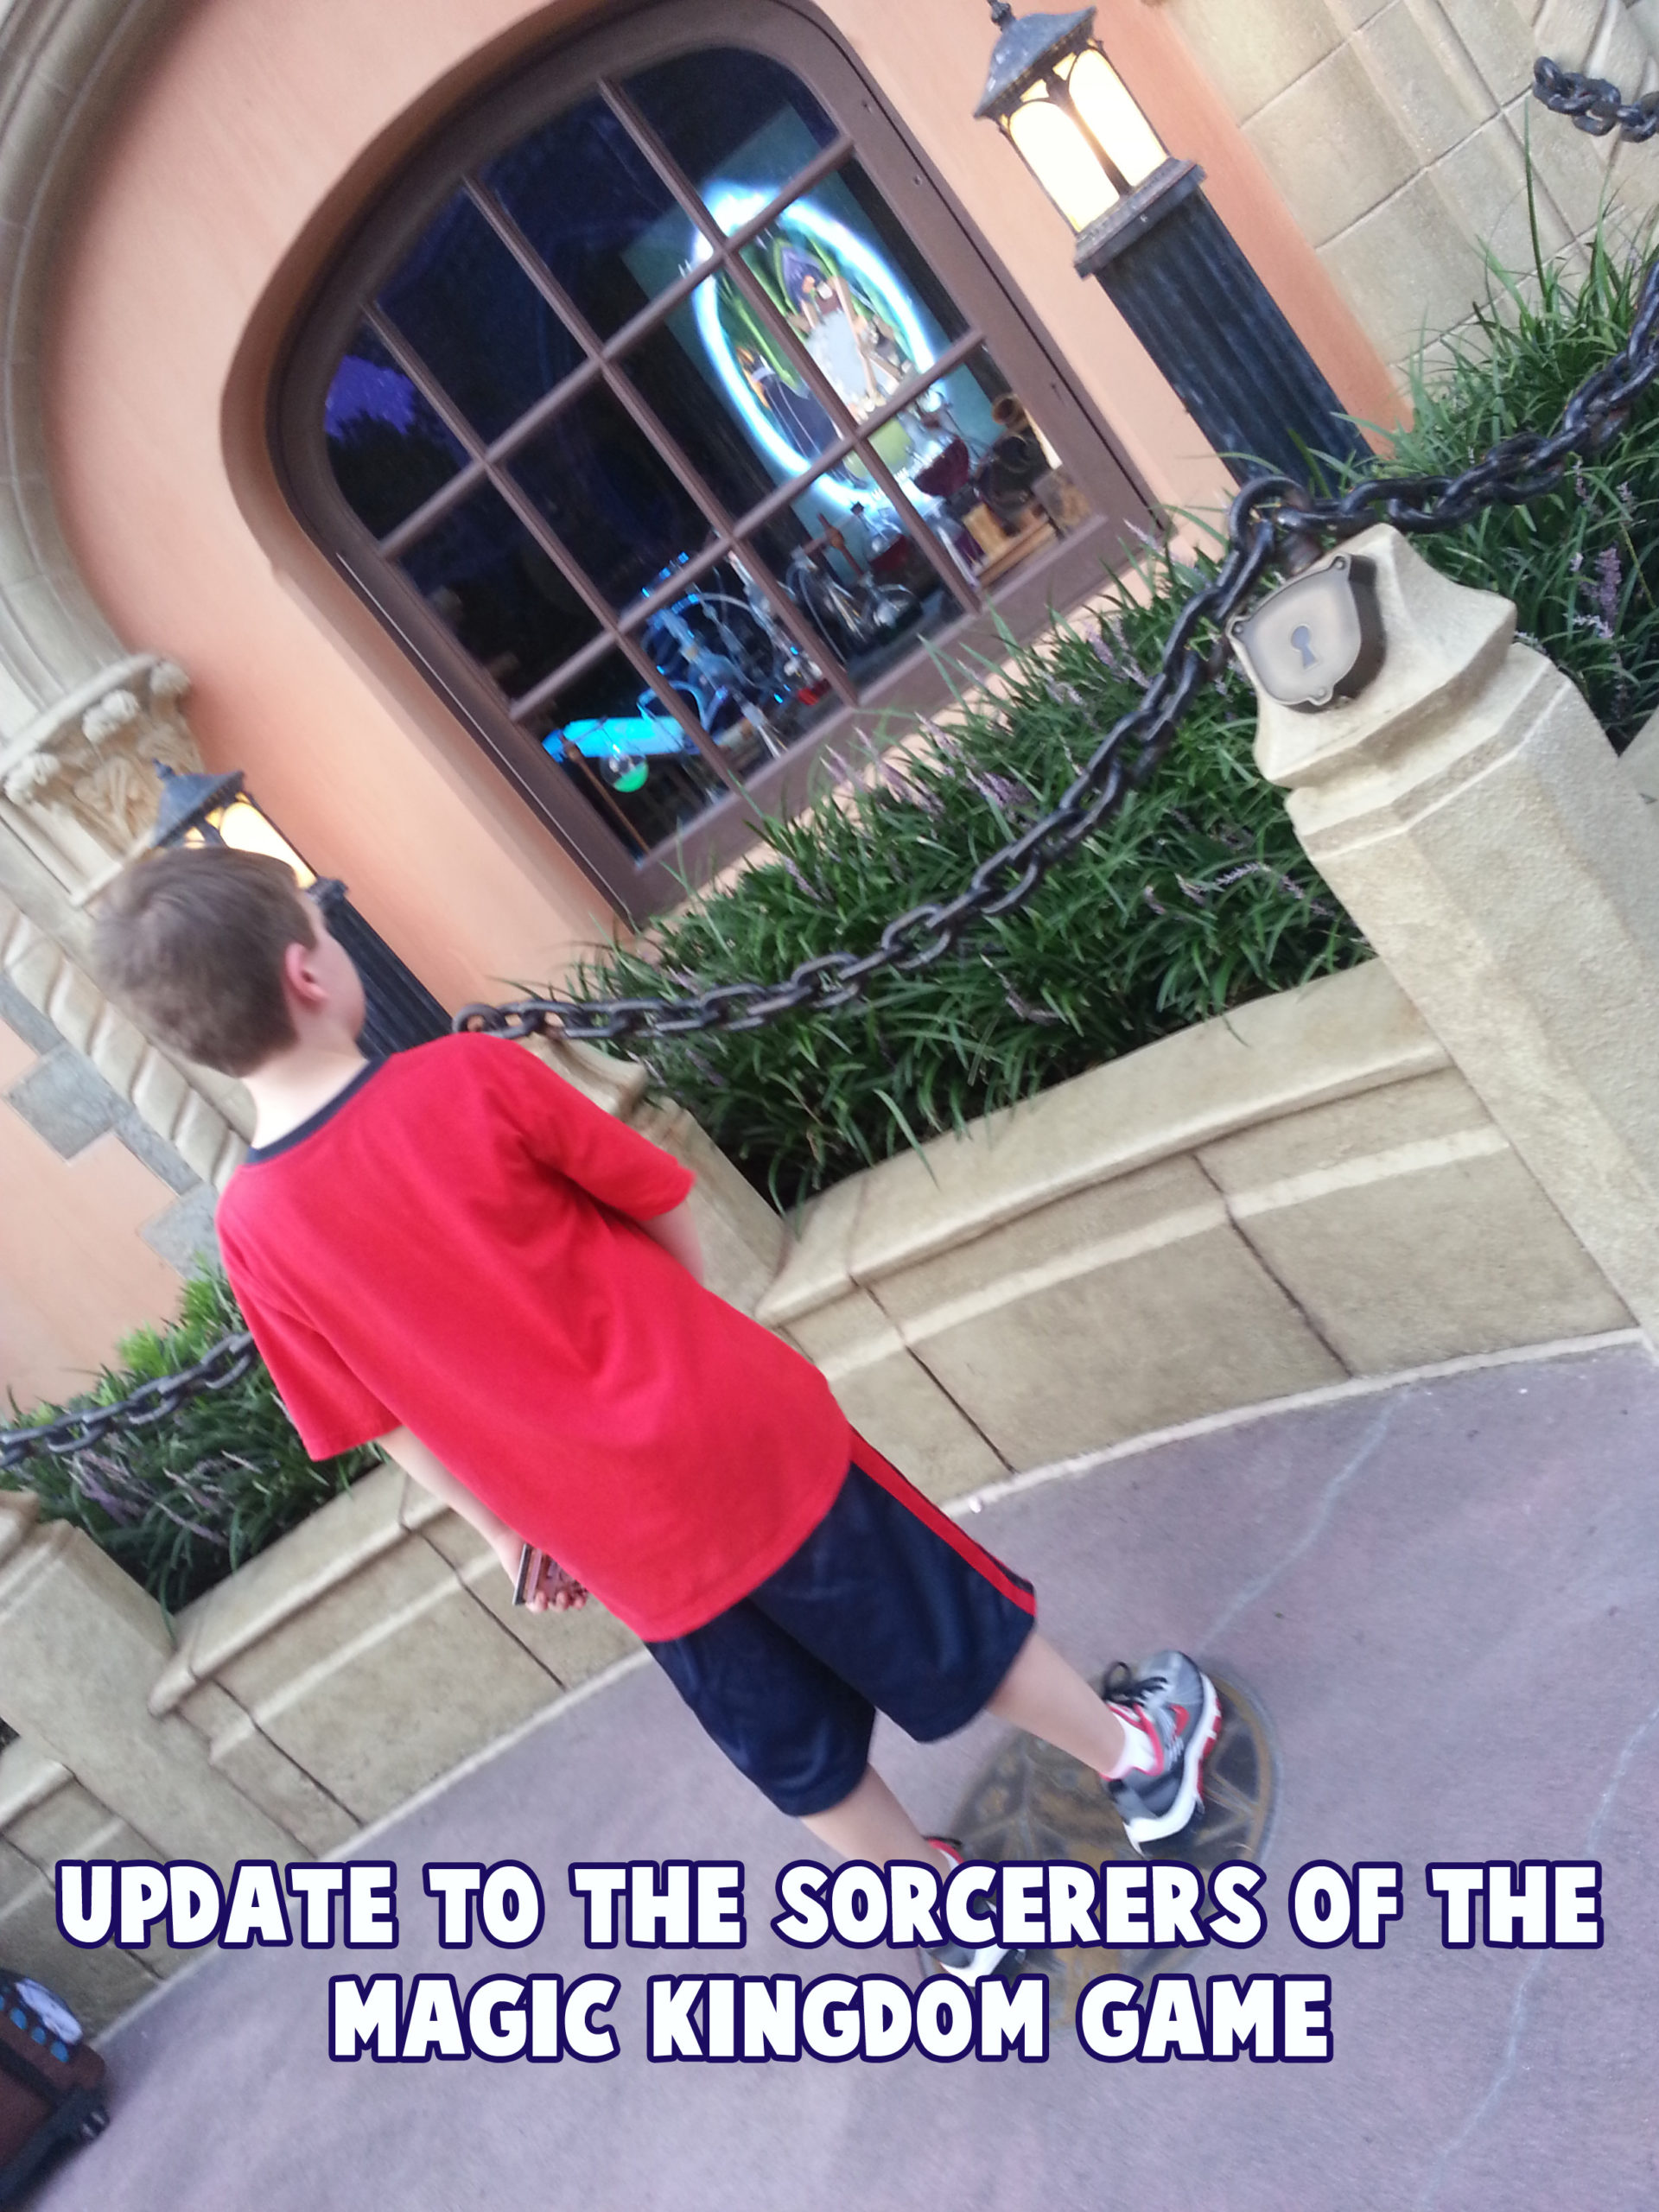 Update to the Sorcerers of the Magic Kingdom